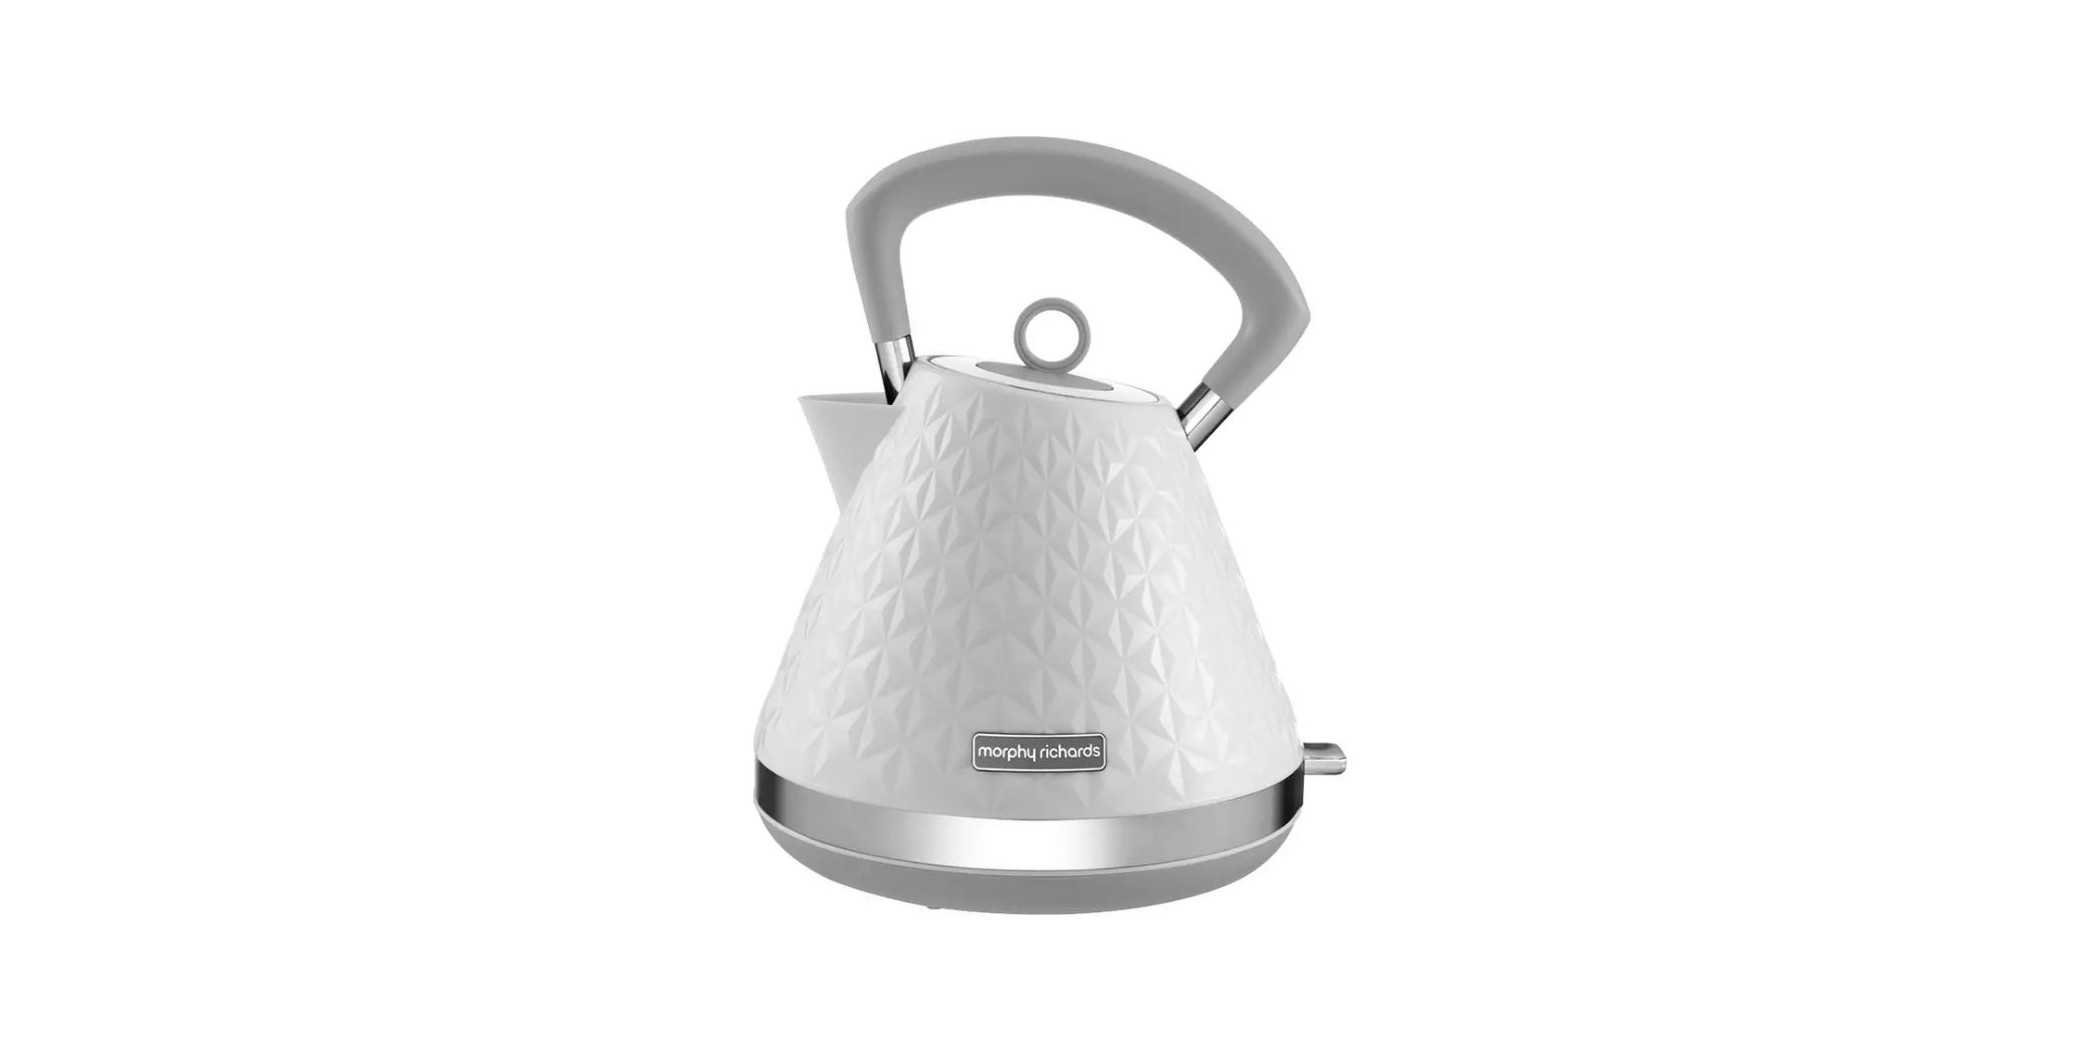 Morphy Richards 108134 1.5L White Vector Pyramid Kettle